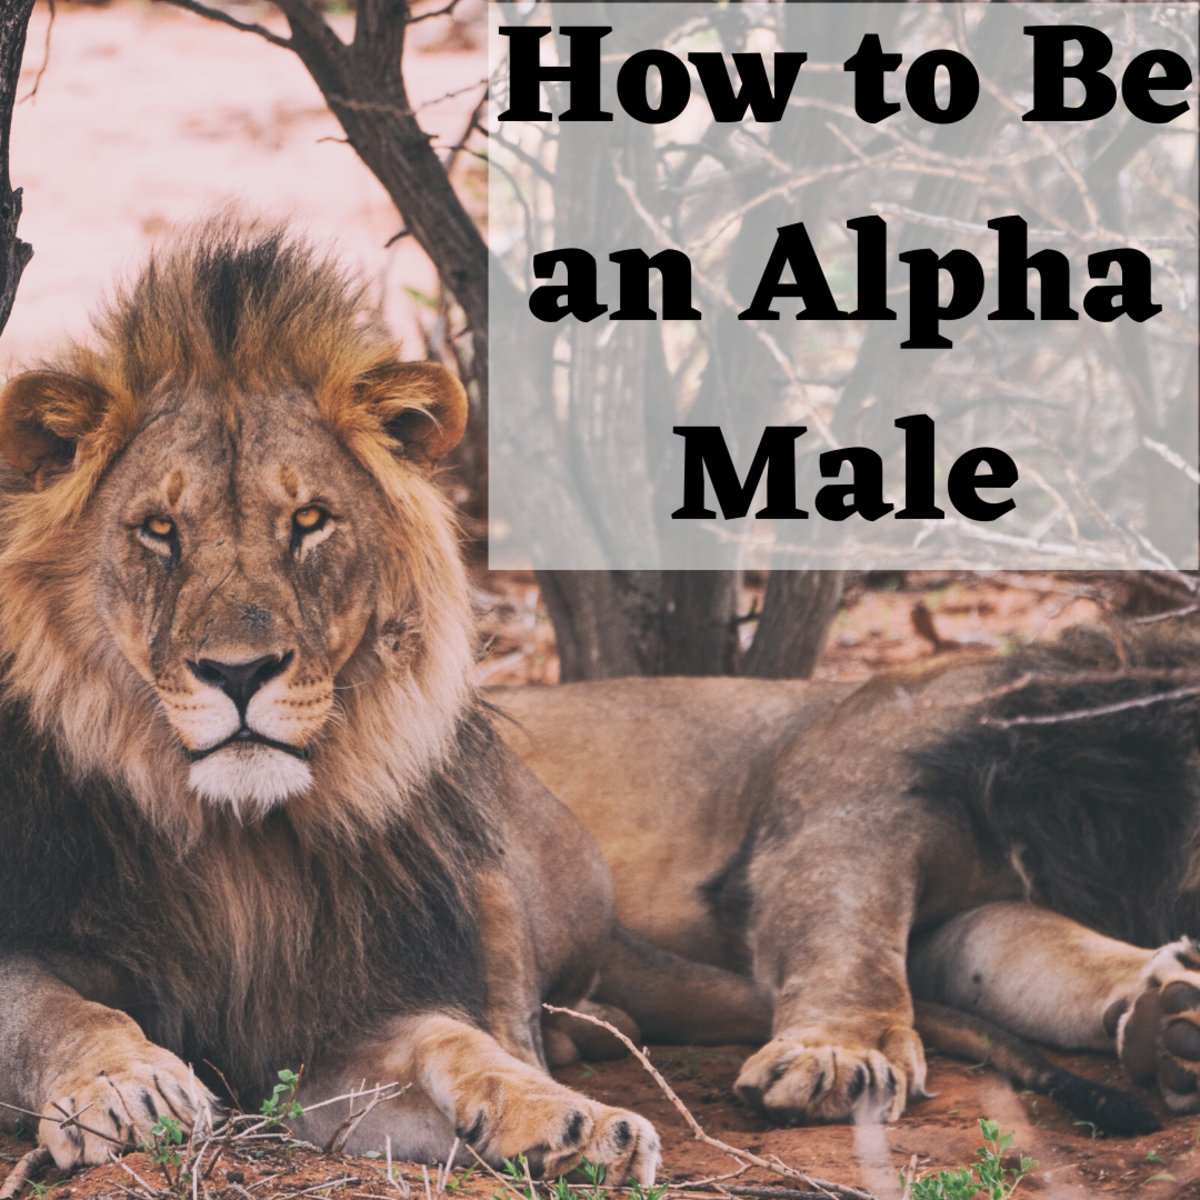 How to Be an Alpha Male: Typical Characteristics, Personality Traits, and  Behaviors - PairedLife